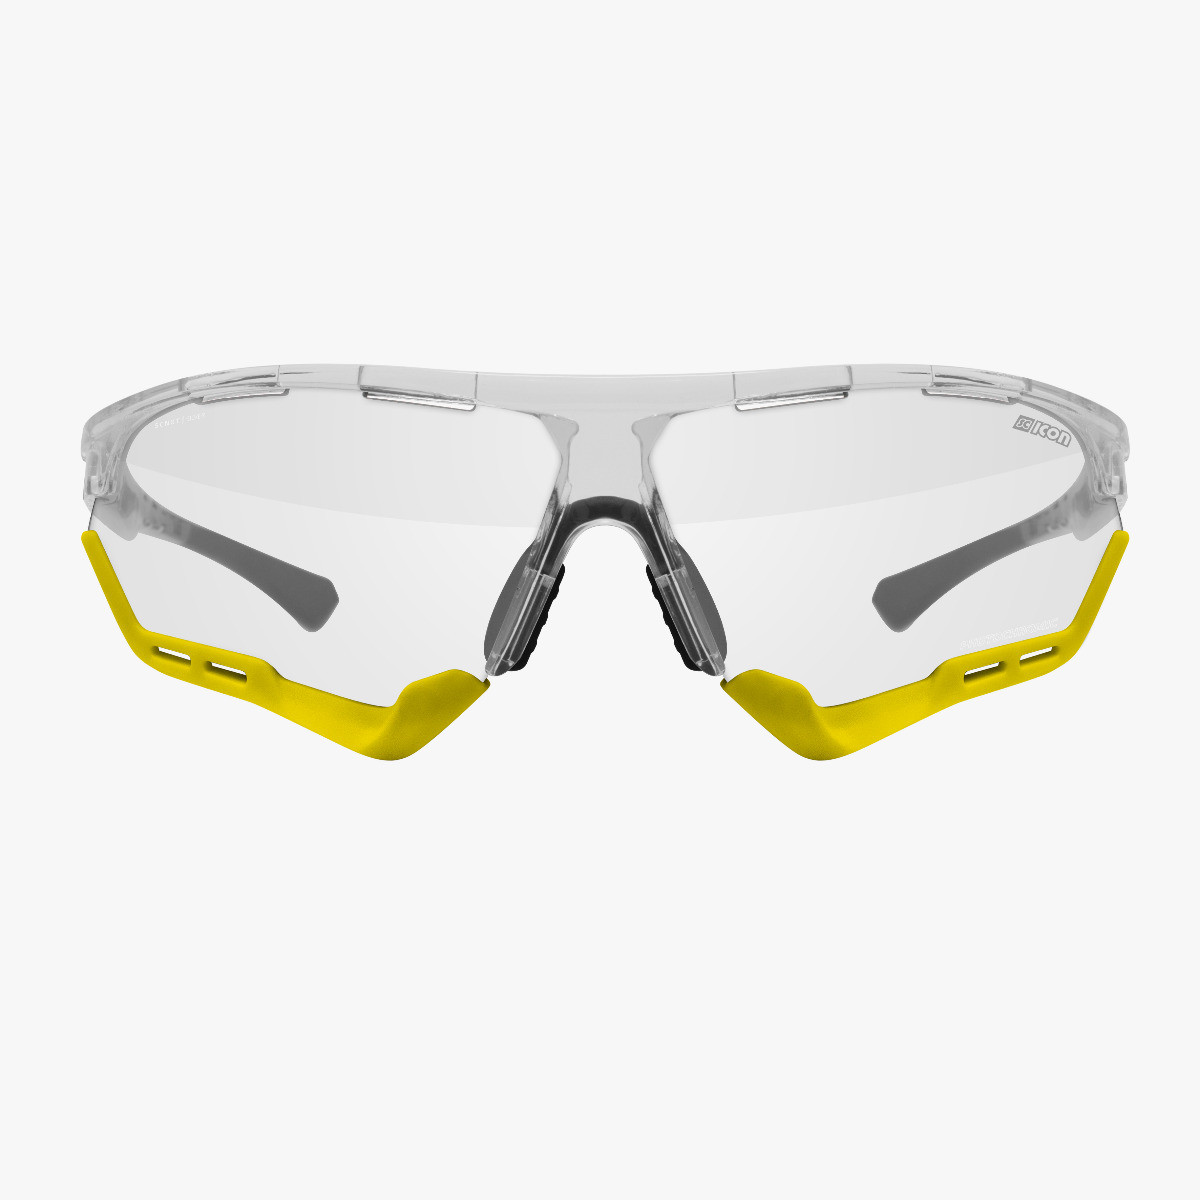 Scicon Sports | Aerocomfort Sport Cycling Performance Sunglasses - Crystal Gloss / Photocromatic Silver - EY15180705
